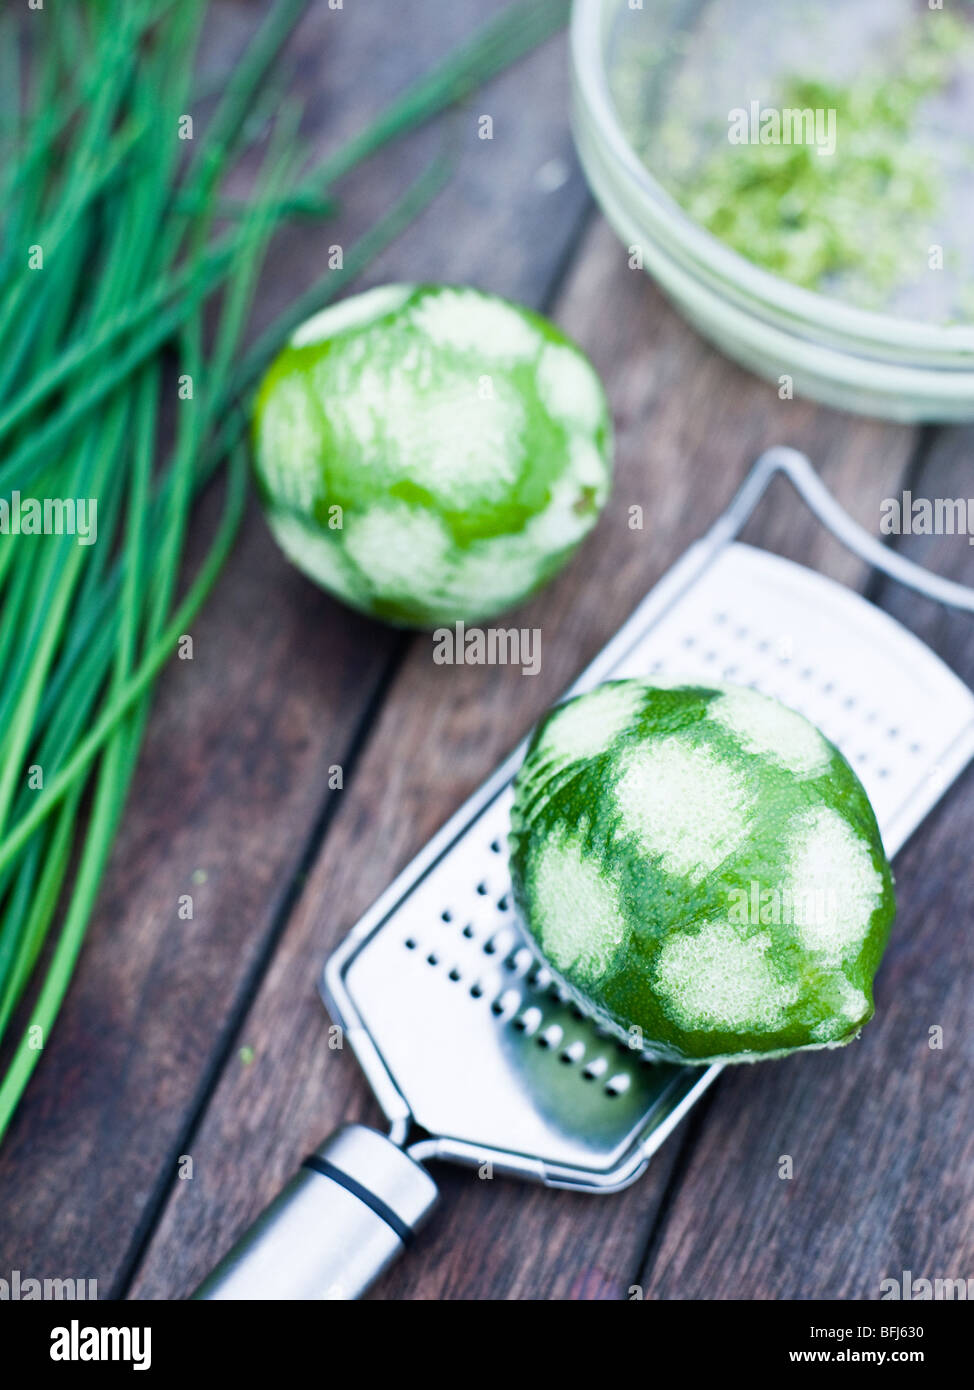 Lime, close-up, Sweden. Stock Photo